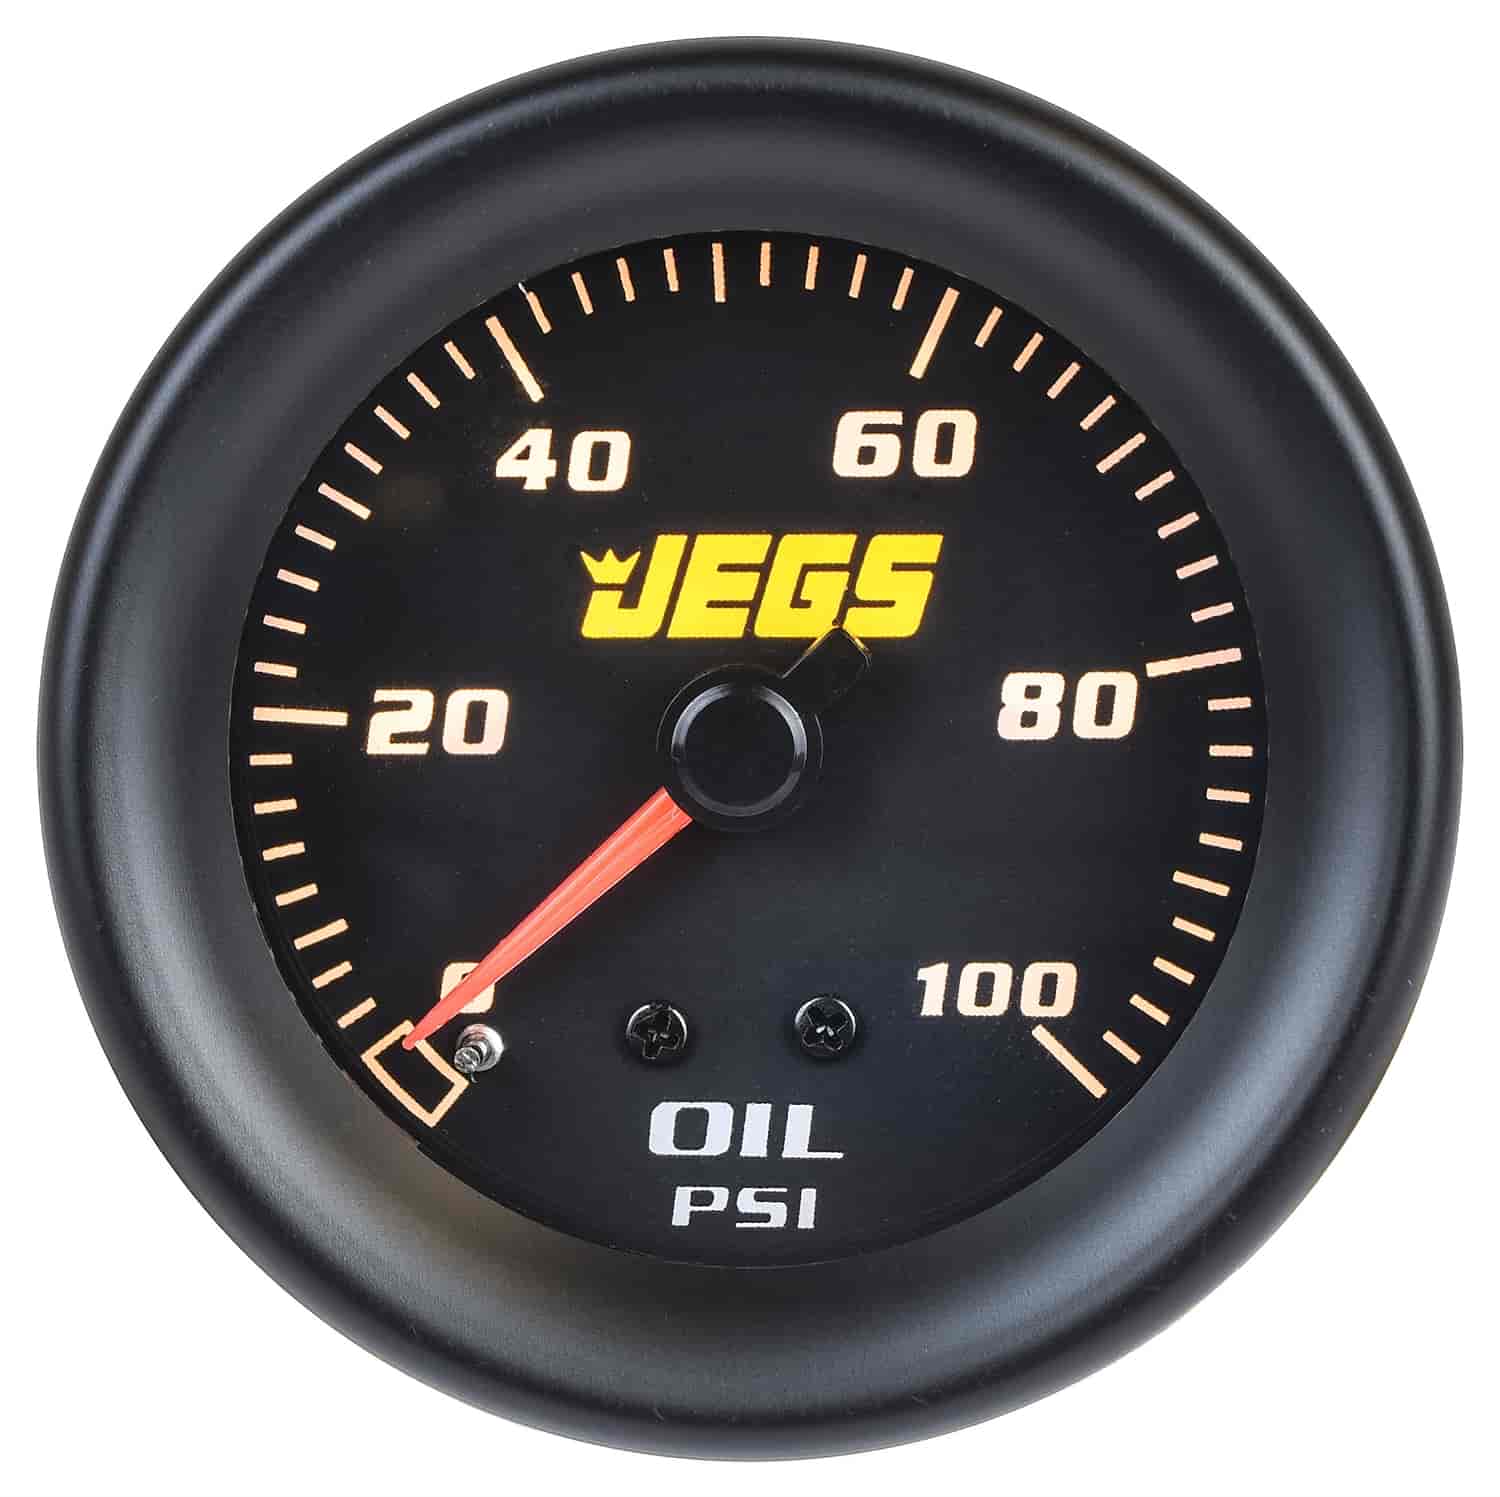 Oil Pressure Gauge [2 1/16 in. Mechanical, 0-100PSI with Black Face]